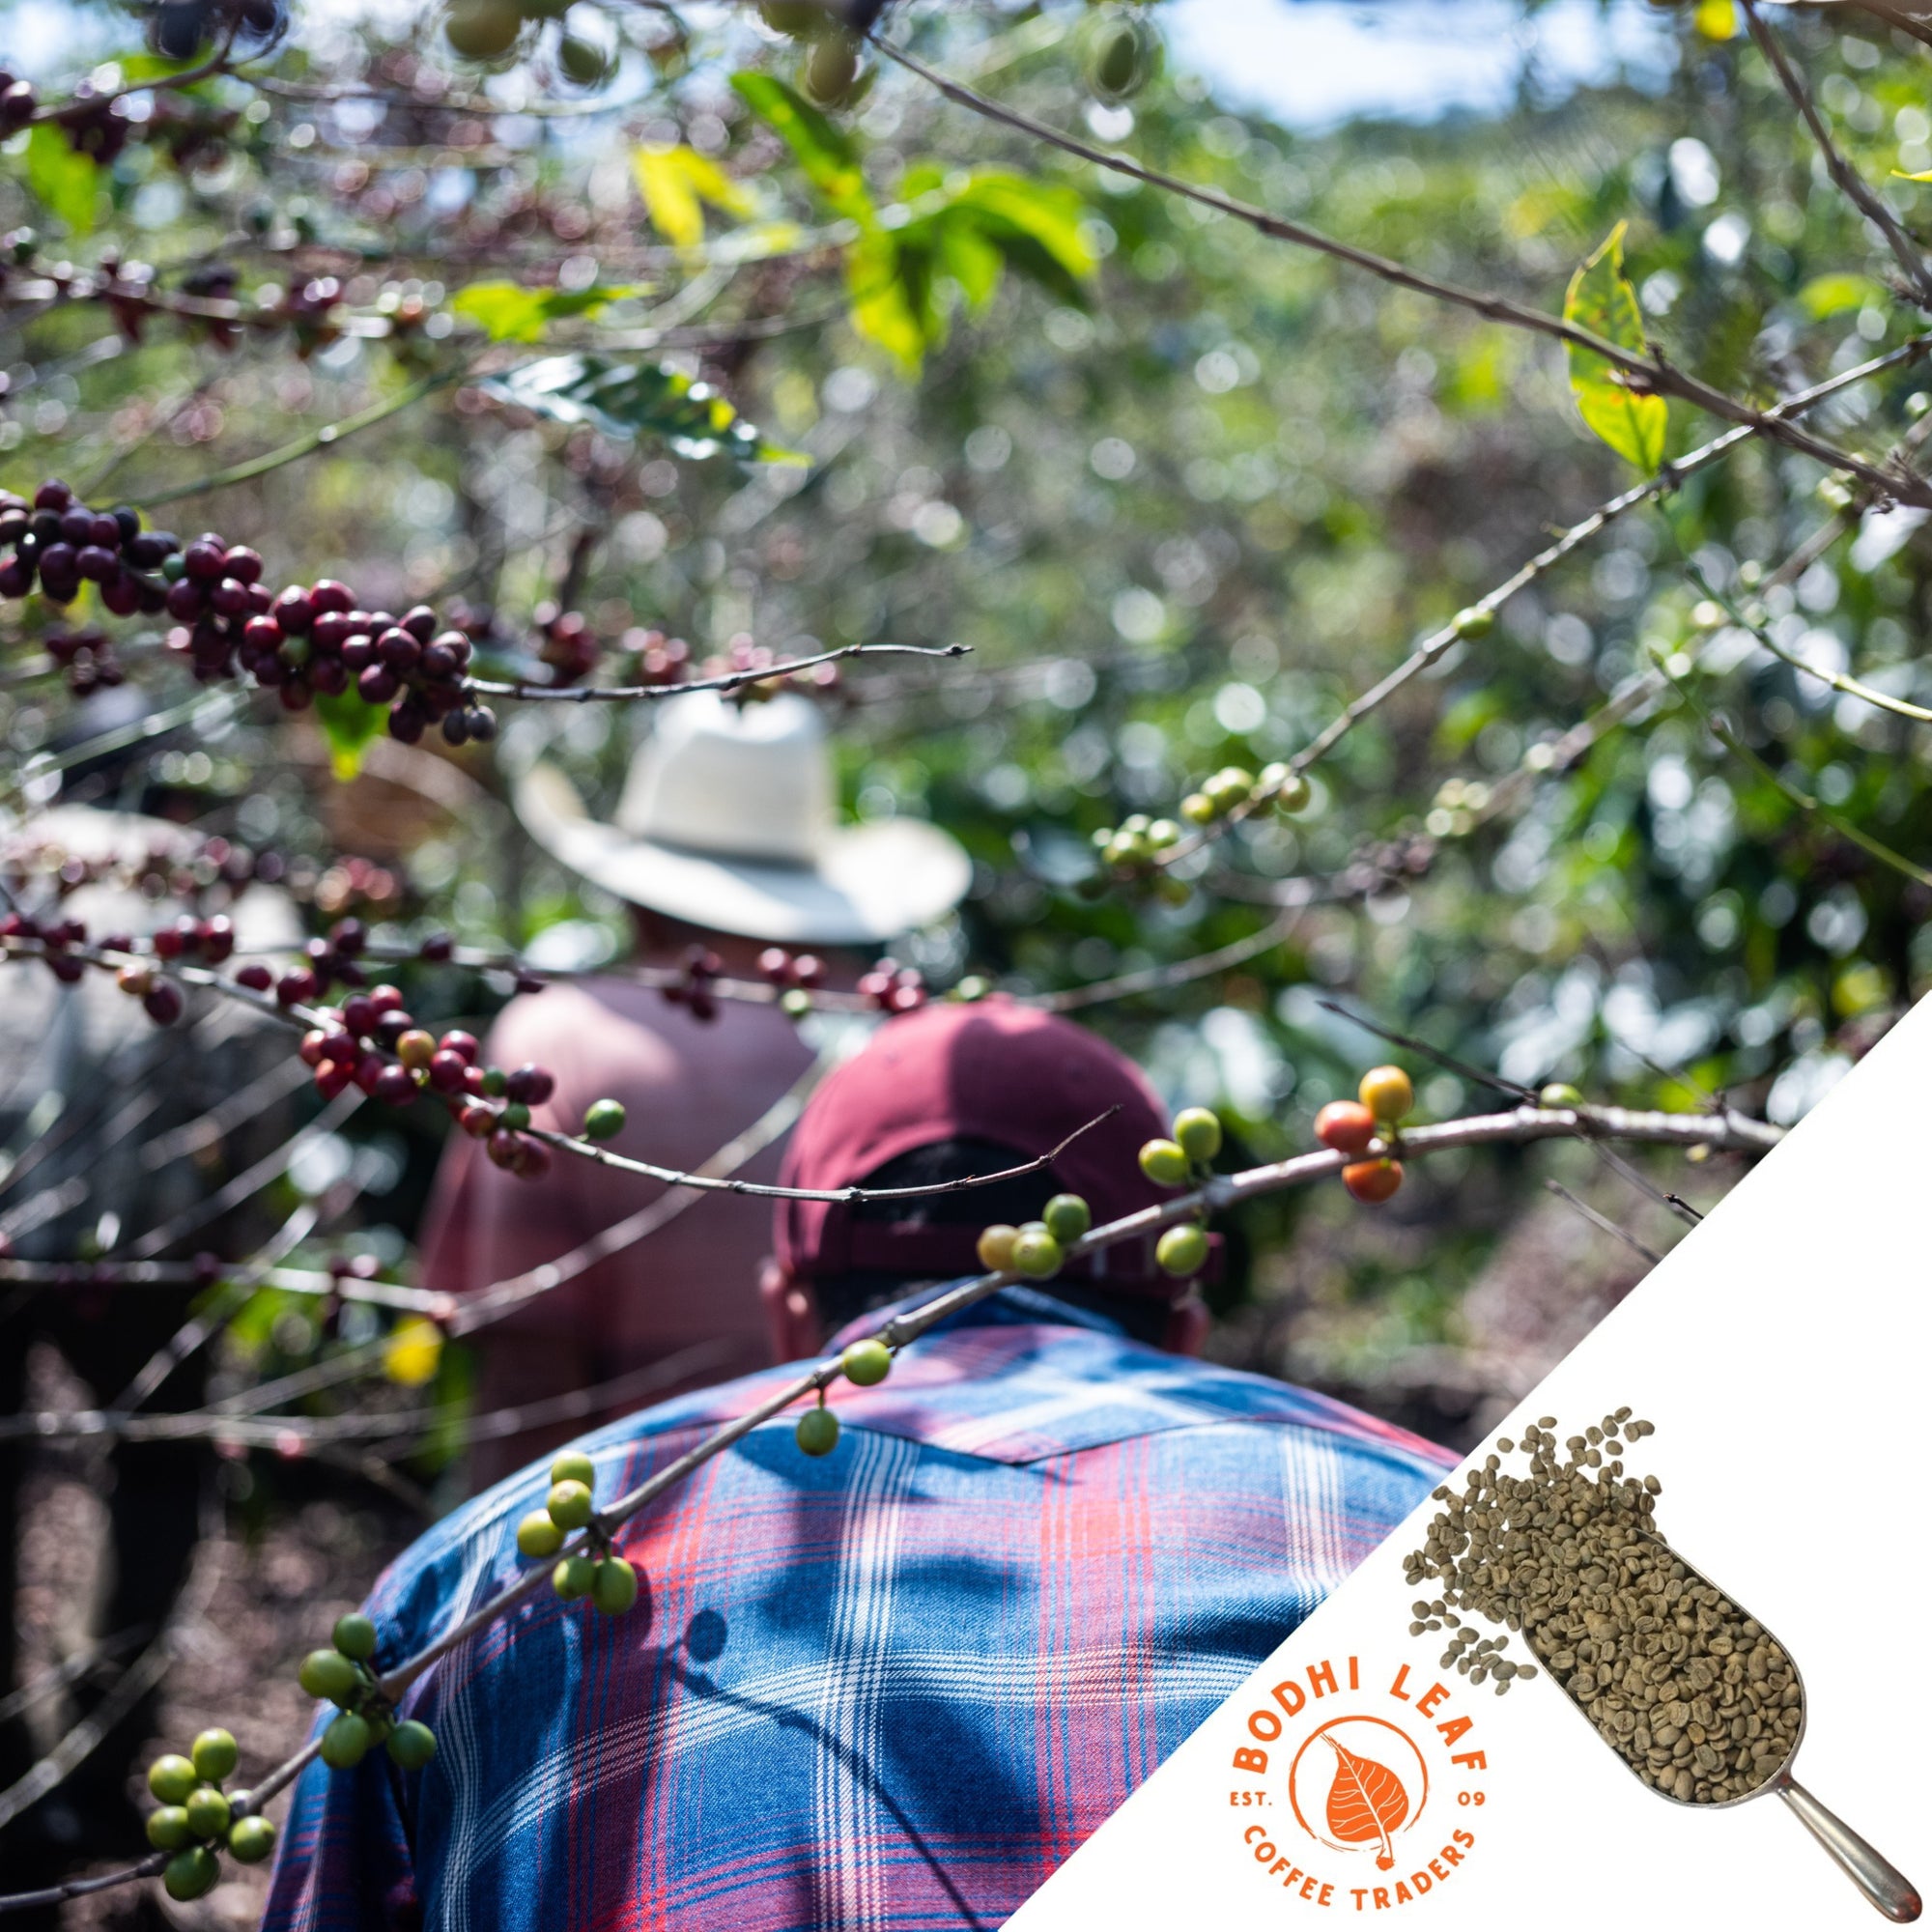 Two coffee farmers walking under branches of coffee cherries